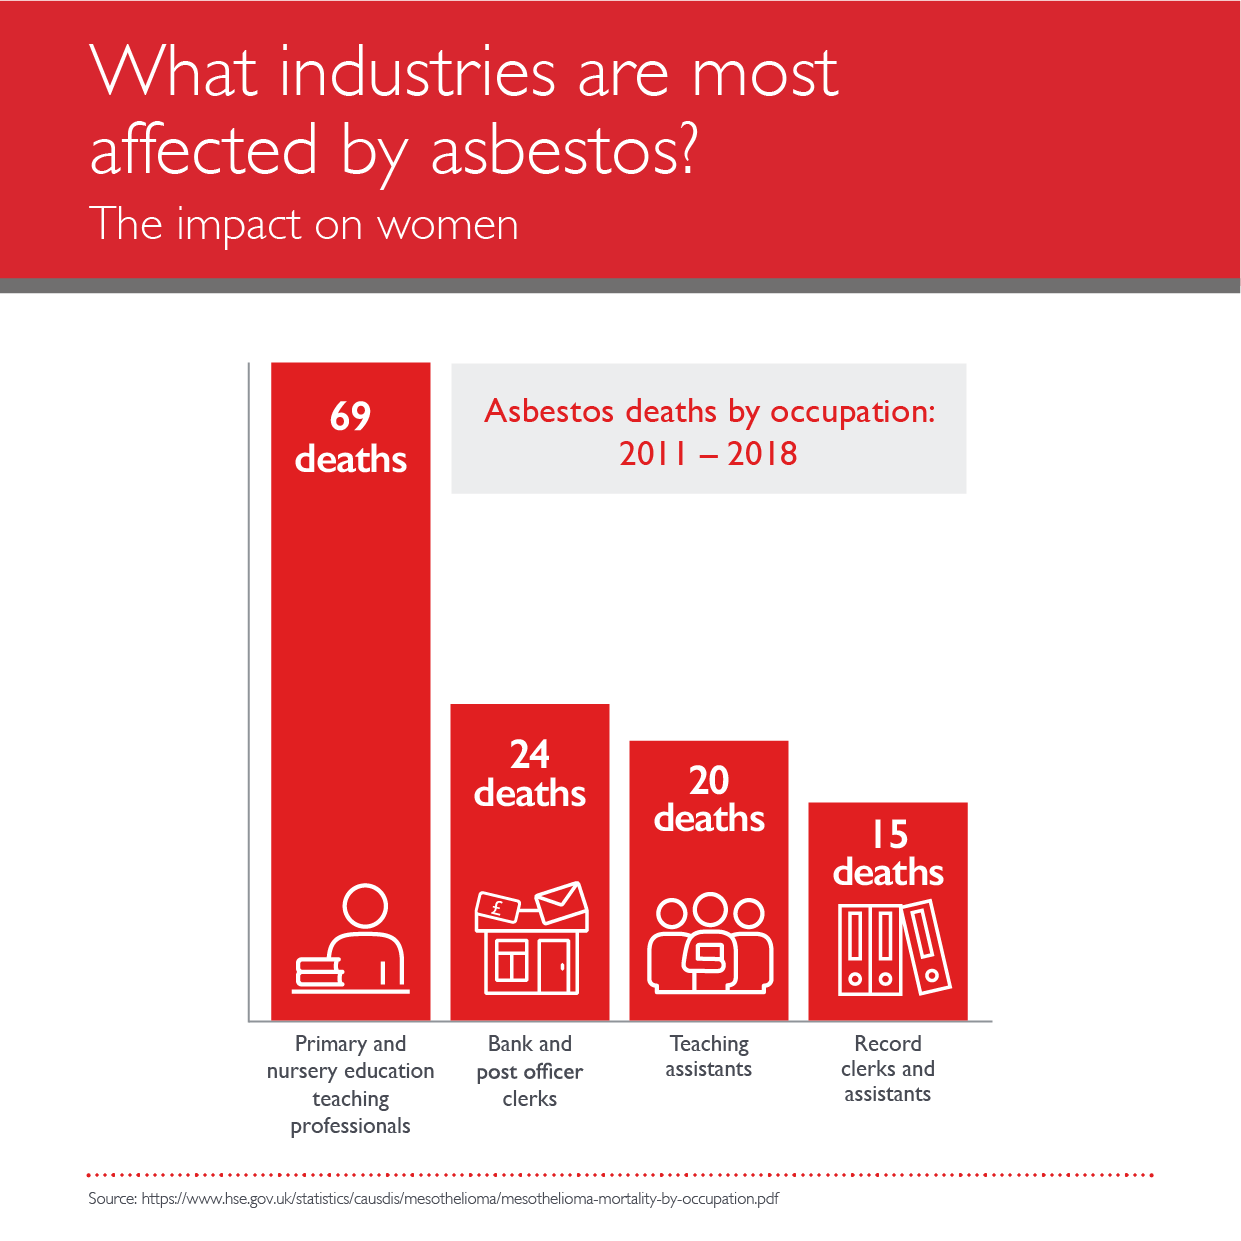 A bar graph of the industries most commonly affected by asbestos for women